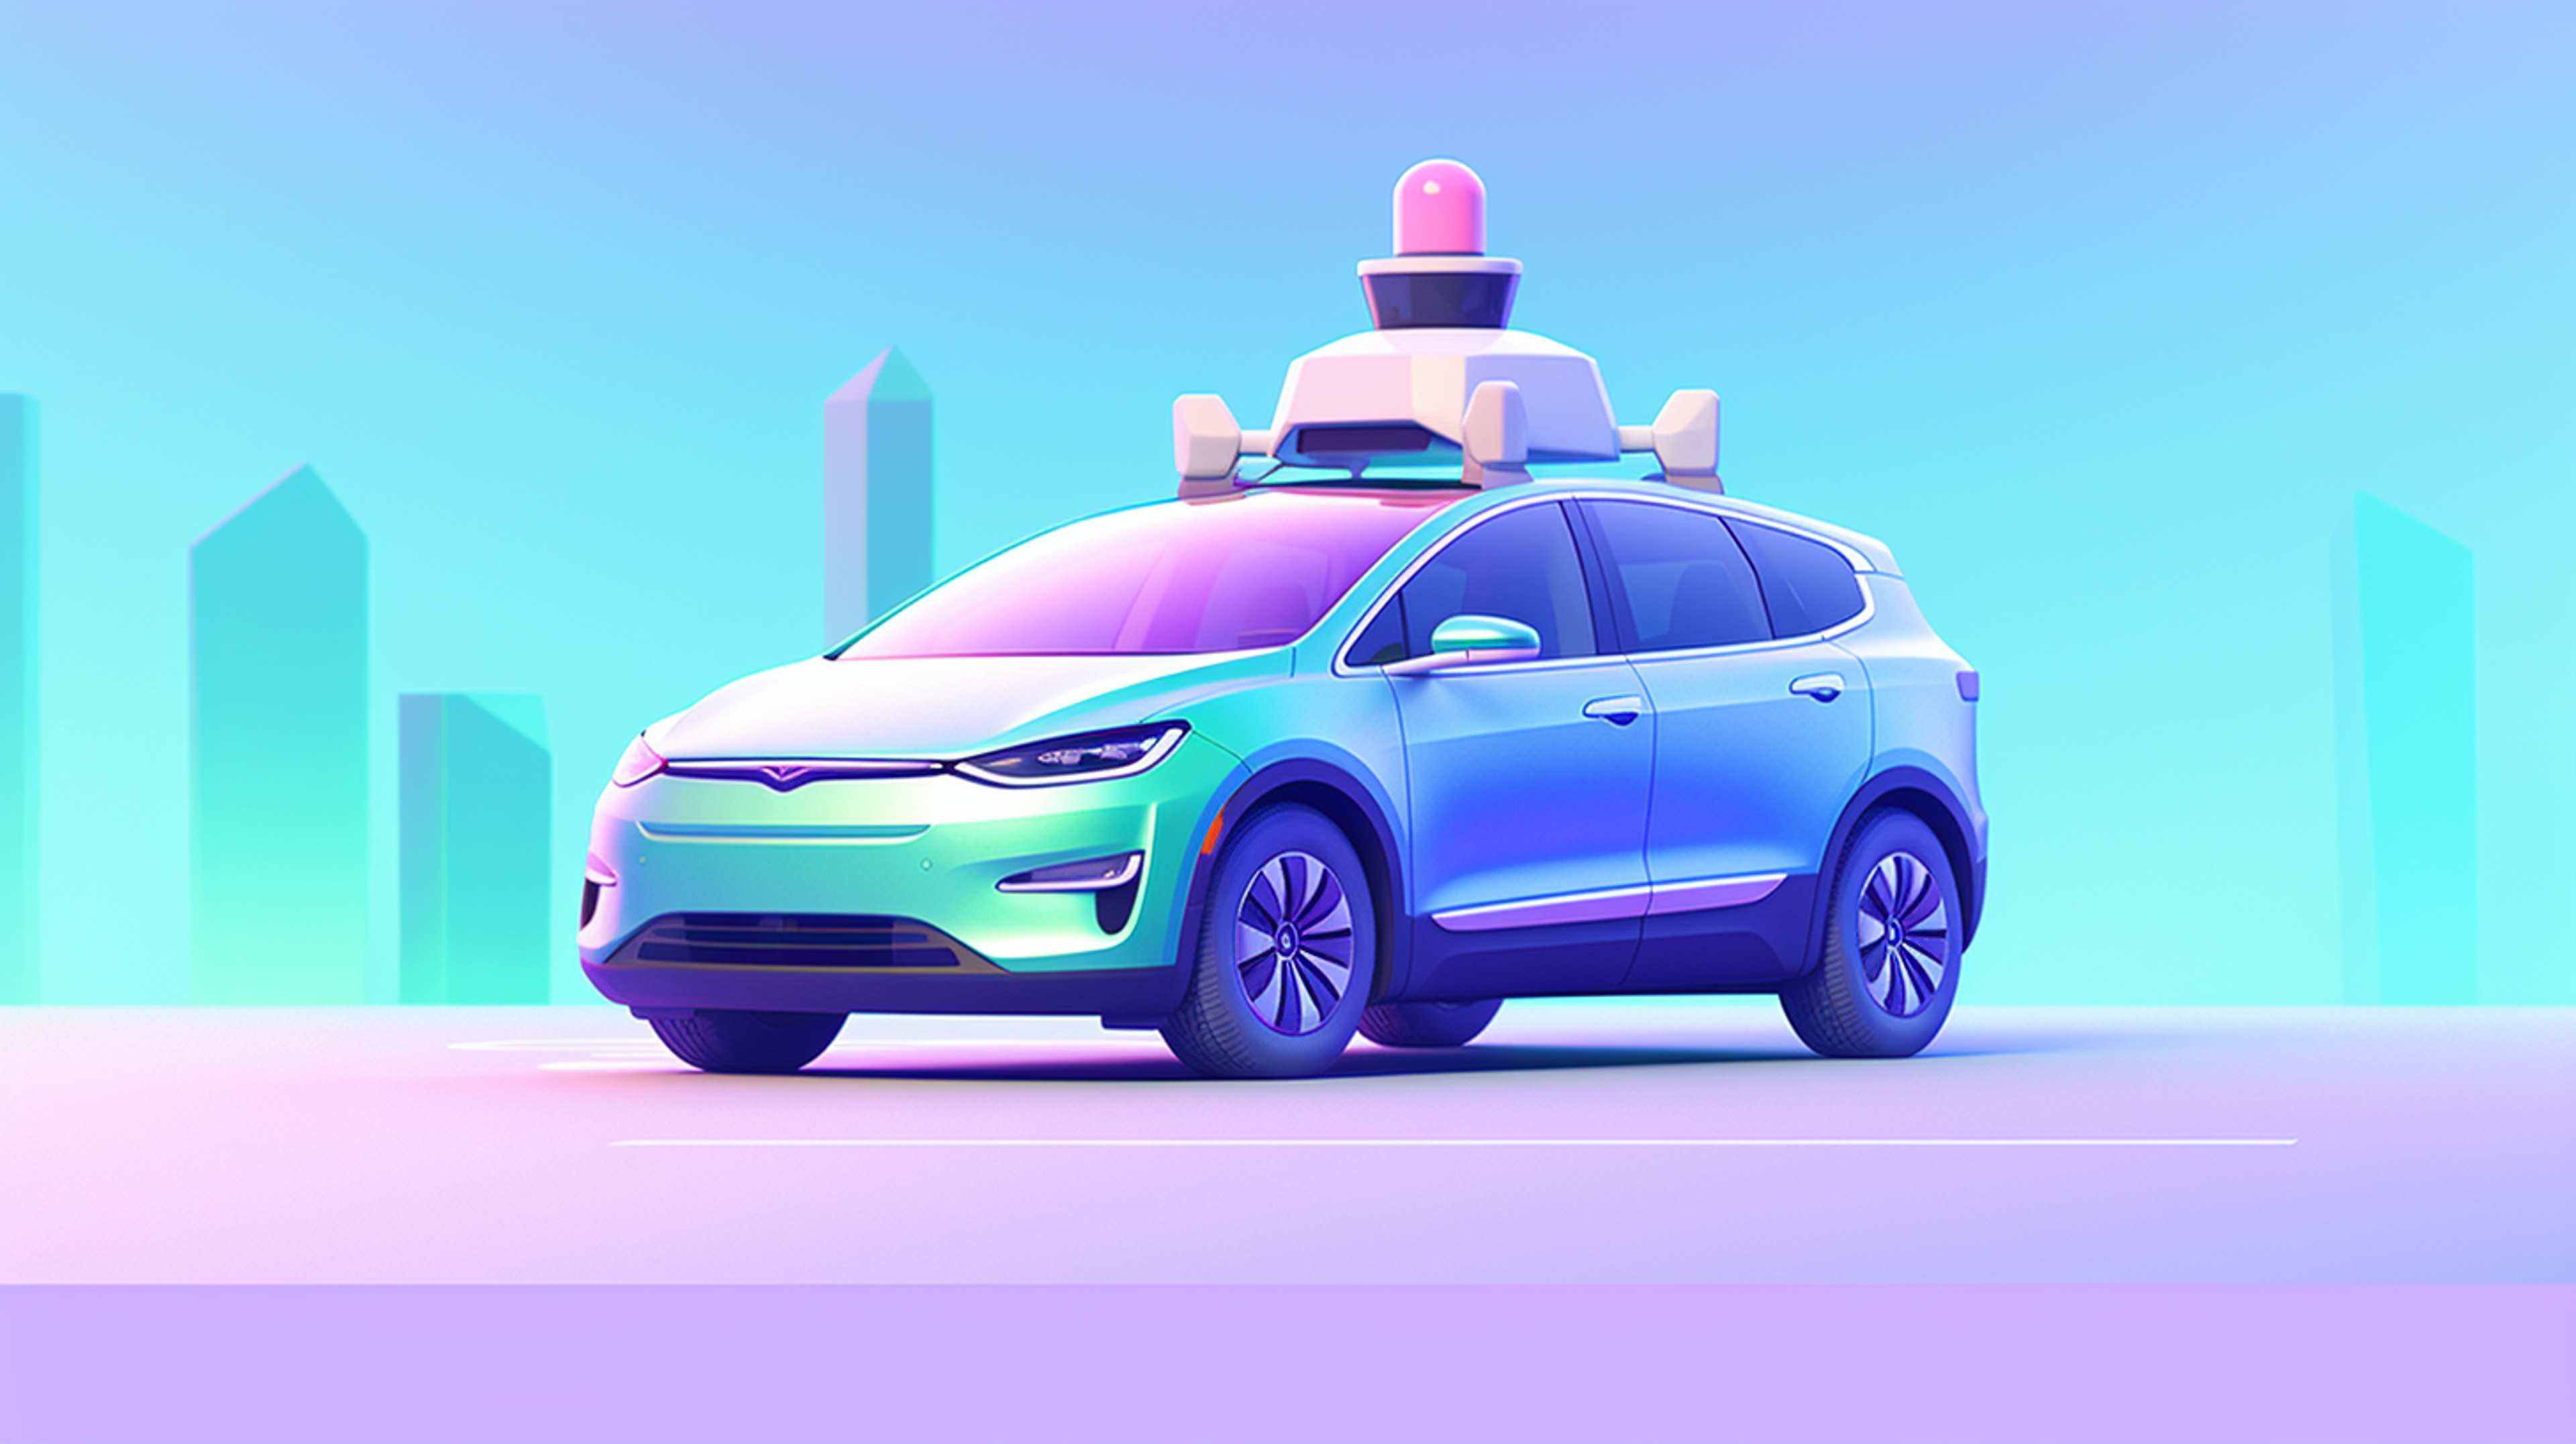 Online Self-Driving Car Engineer Training Course